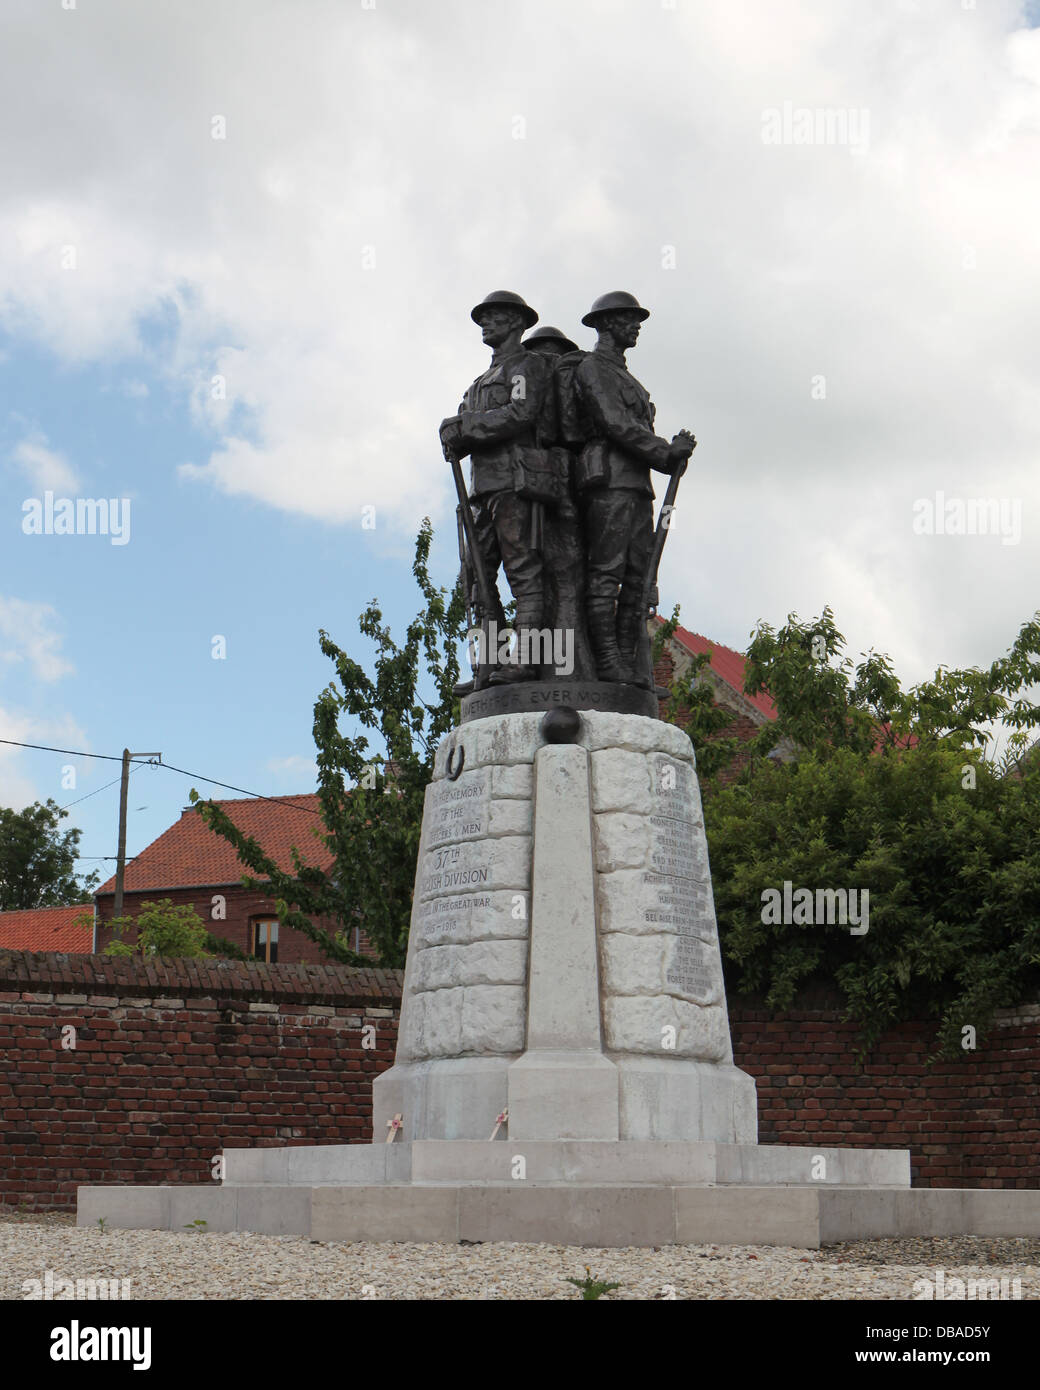 The 37th Division Memorial from the Great War in Monchy-le-Preux, France Stock Photo